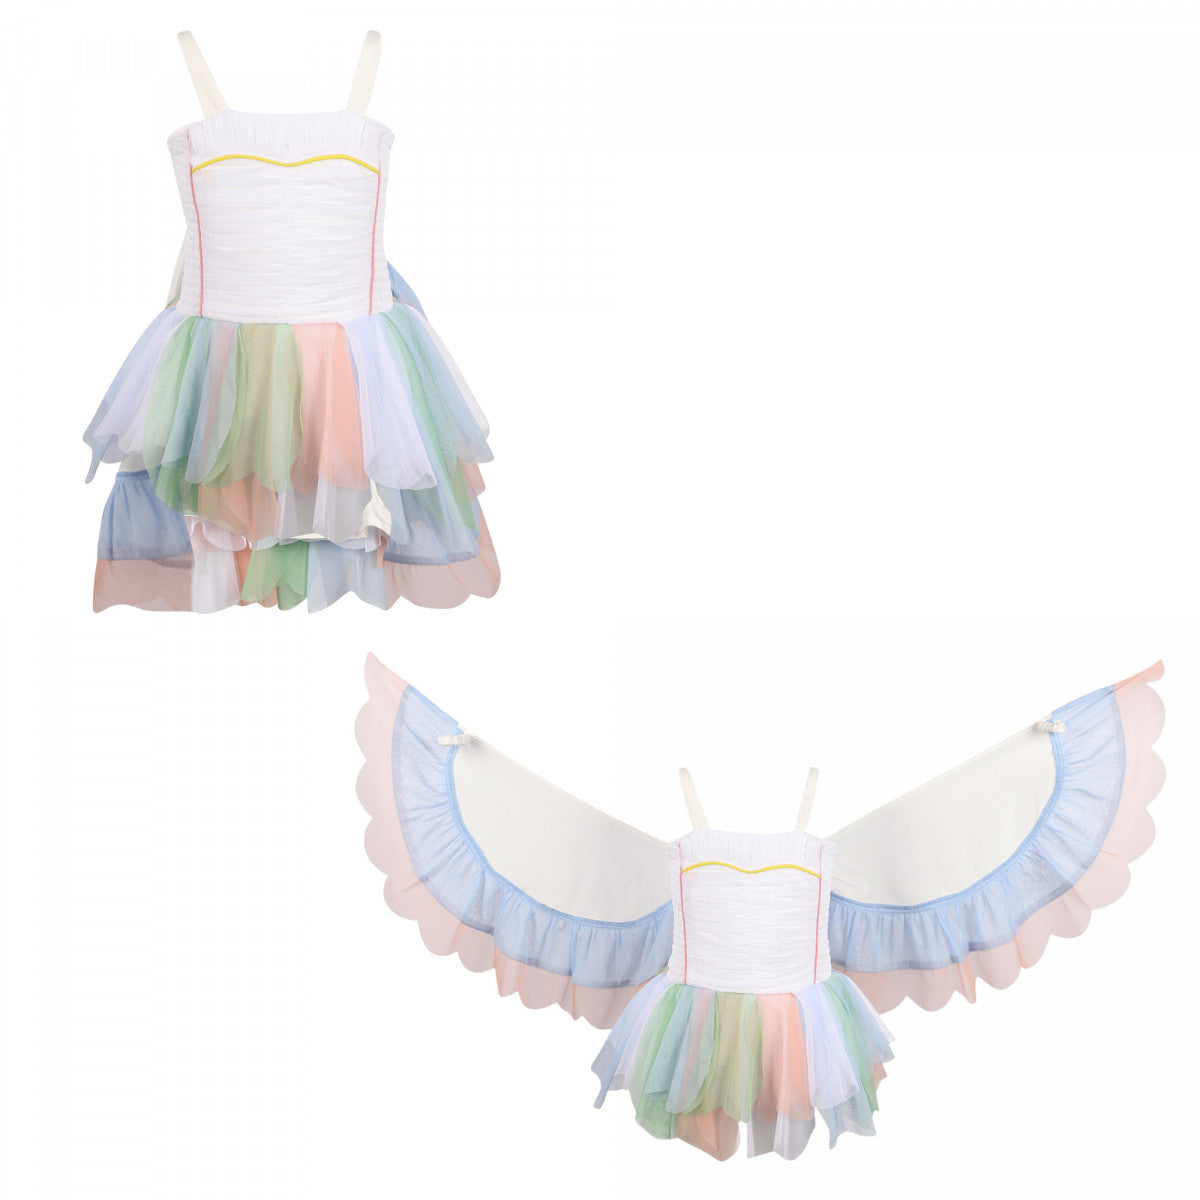 Butterfly Wings Ruffled Tulle Dress in White and Pastels